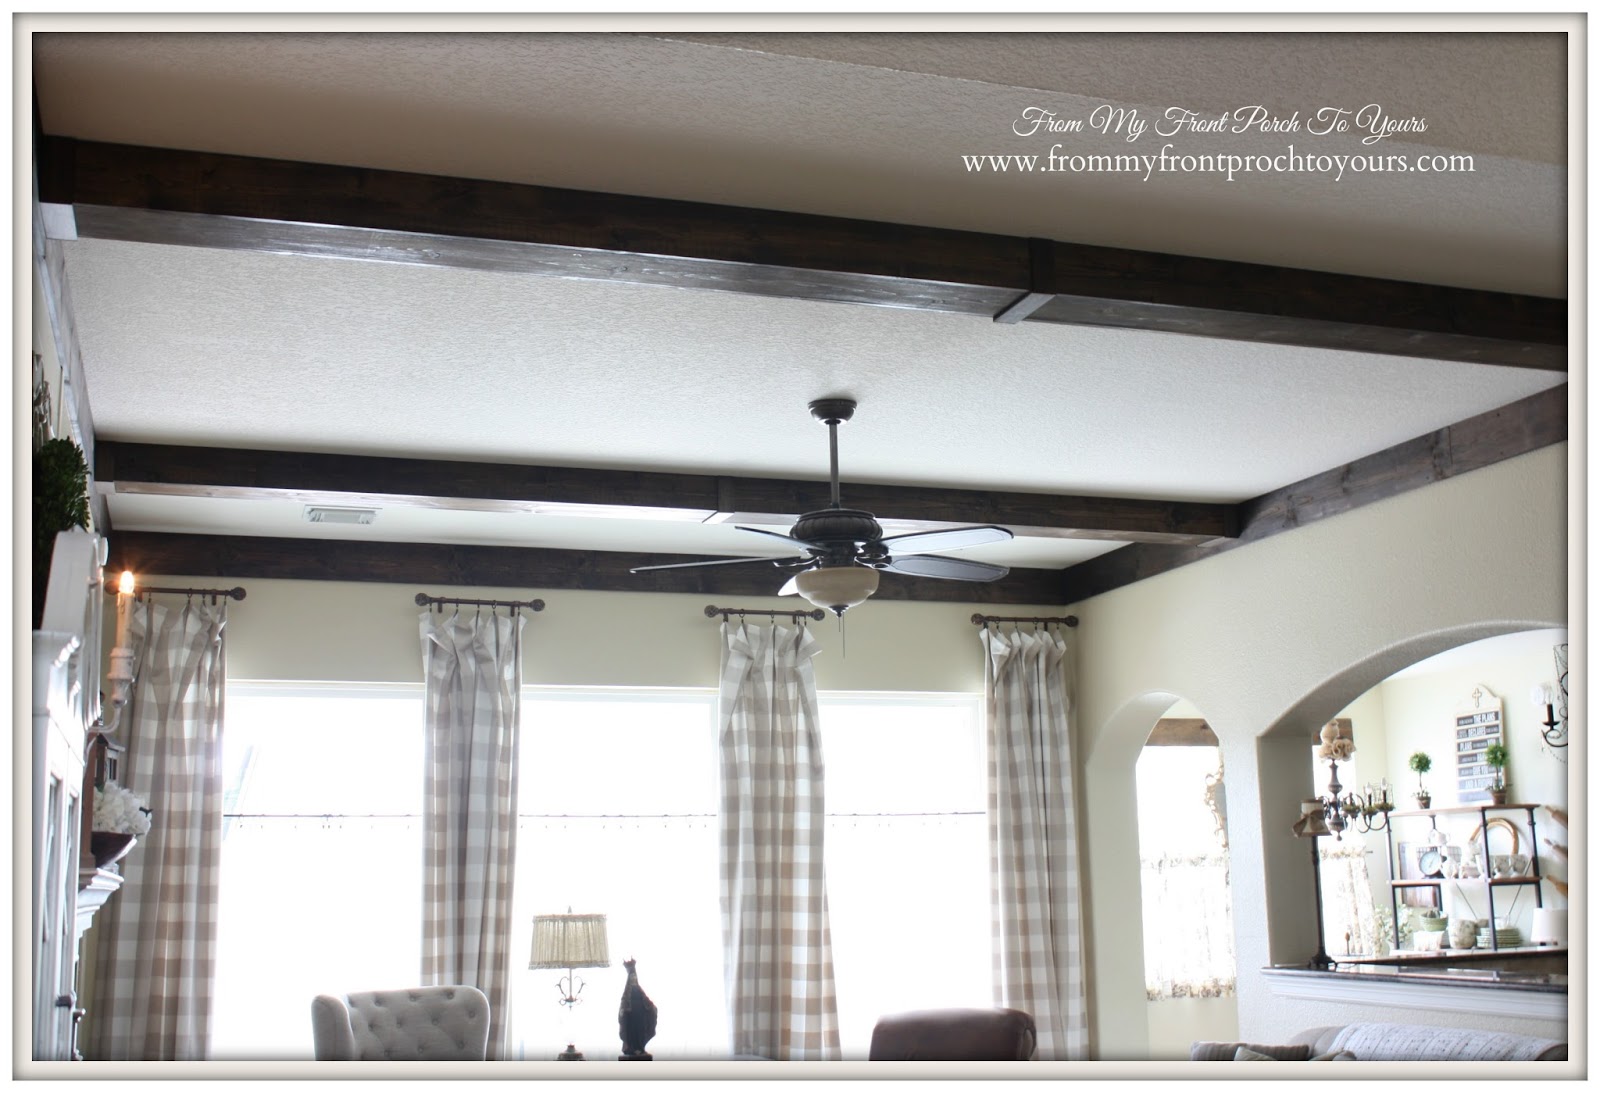 French Farmhouse living room with diy wood beams.- From My Front Porch To Yours